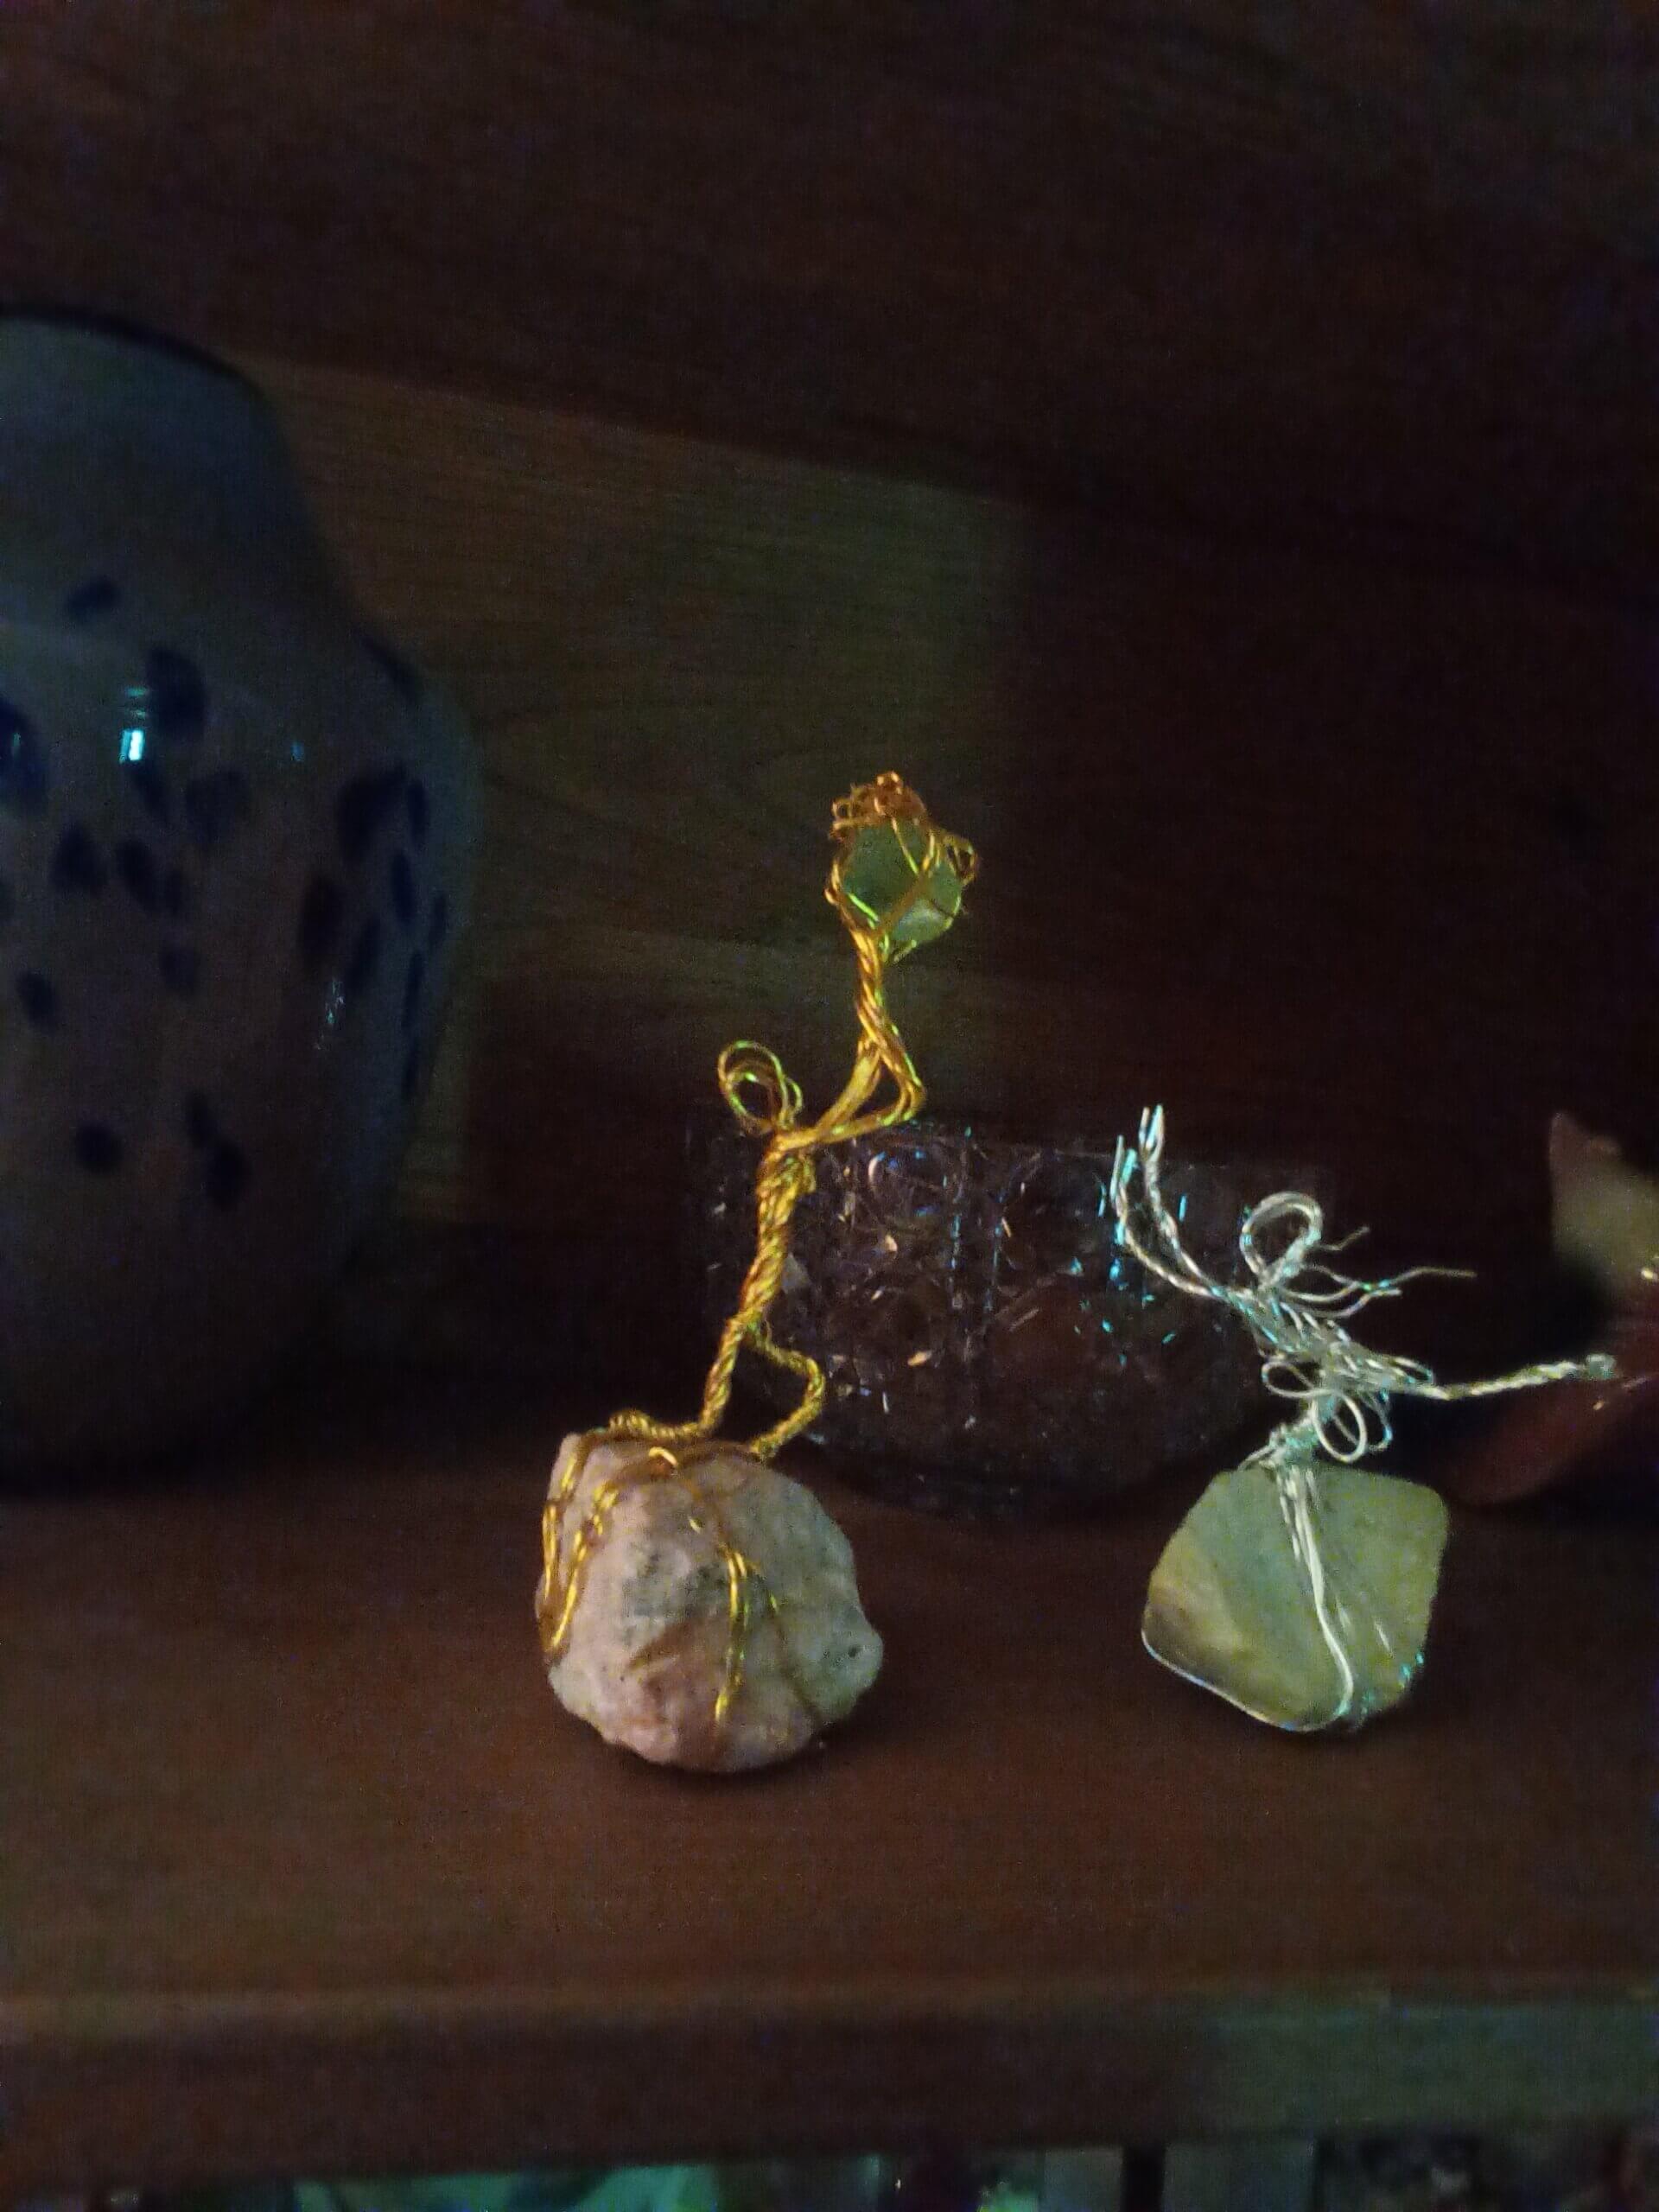 Characters formed by wire weaving and wrapping